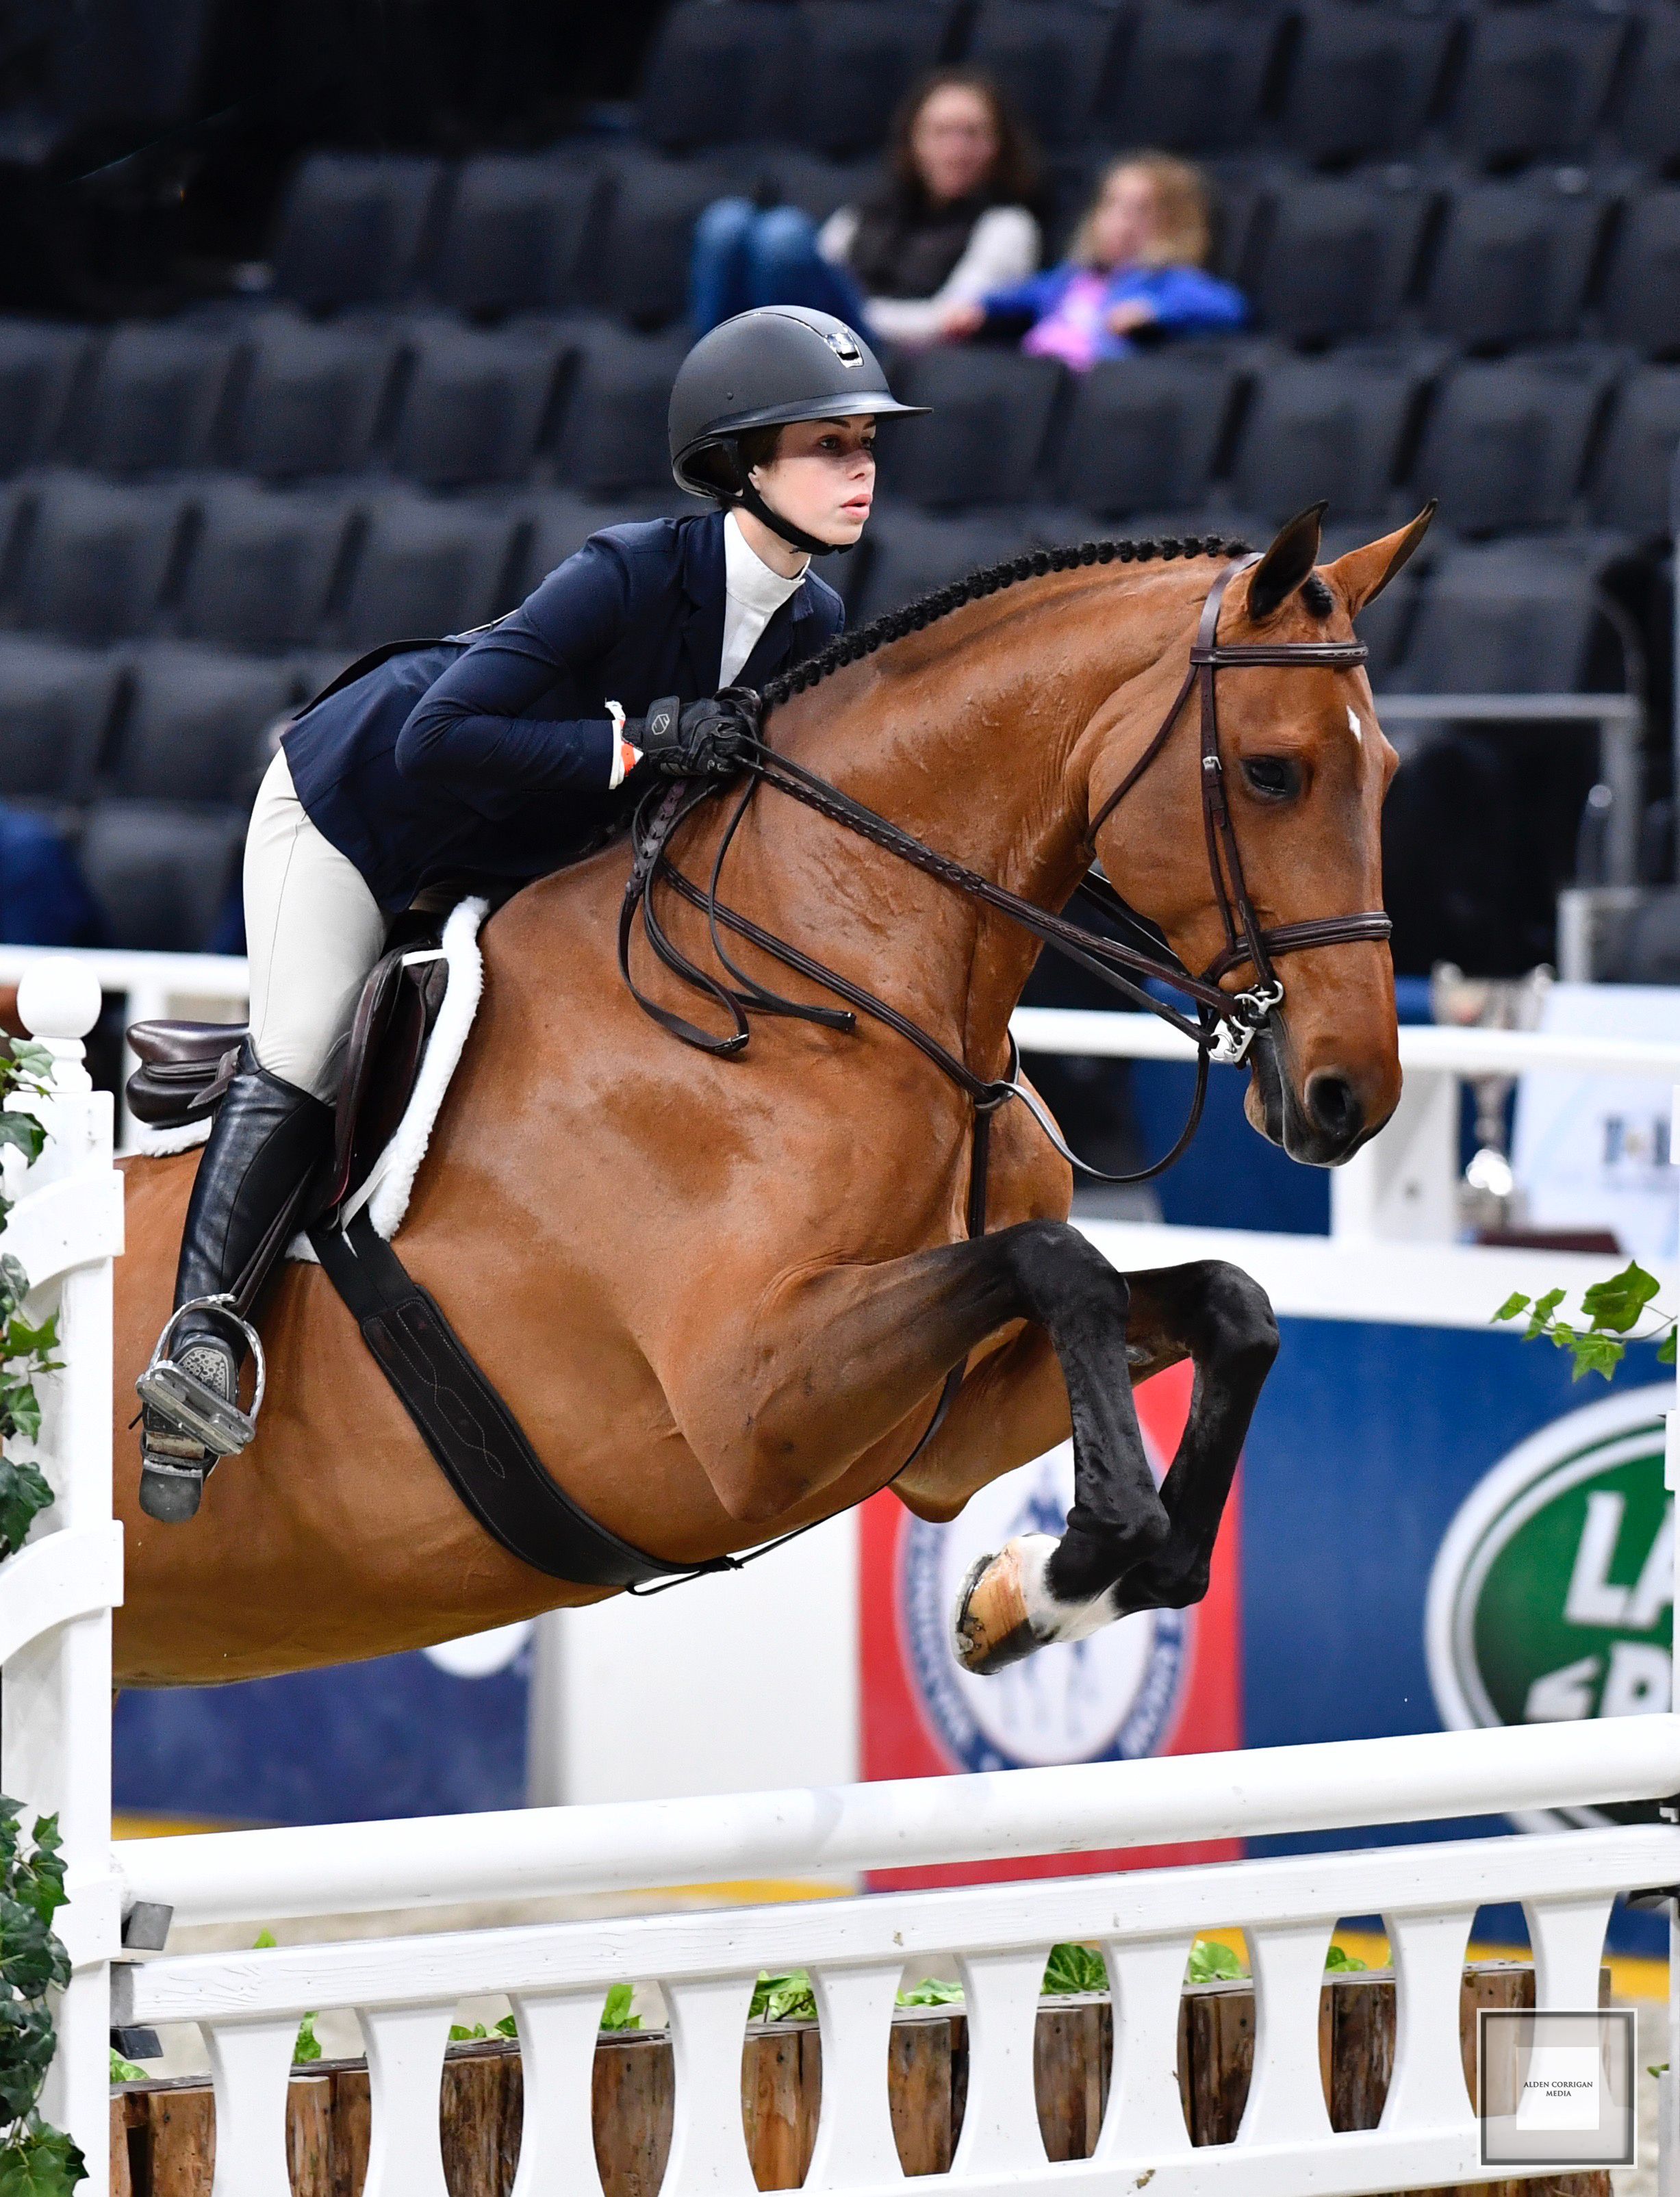 Avery Glynn and Calle at the Washington International Medal Finals. Photography by Alden Corrigan Media​​​​​​​